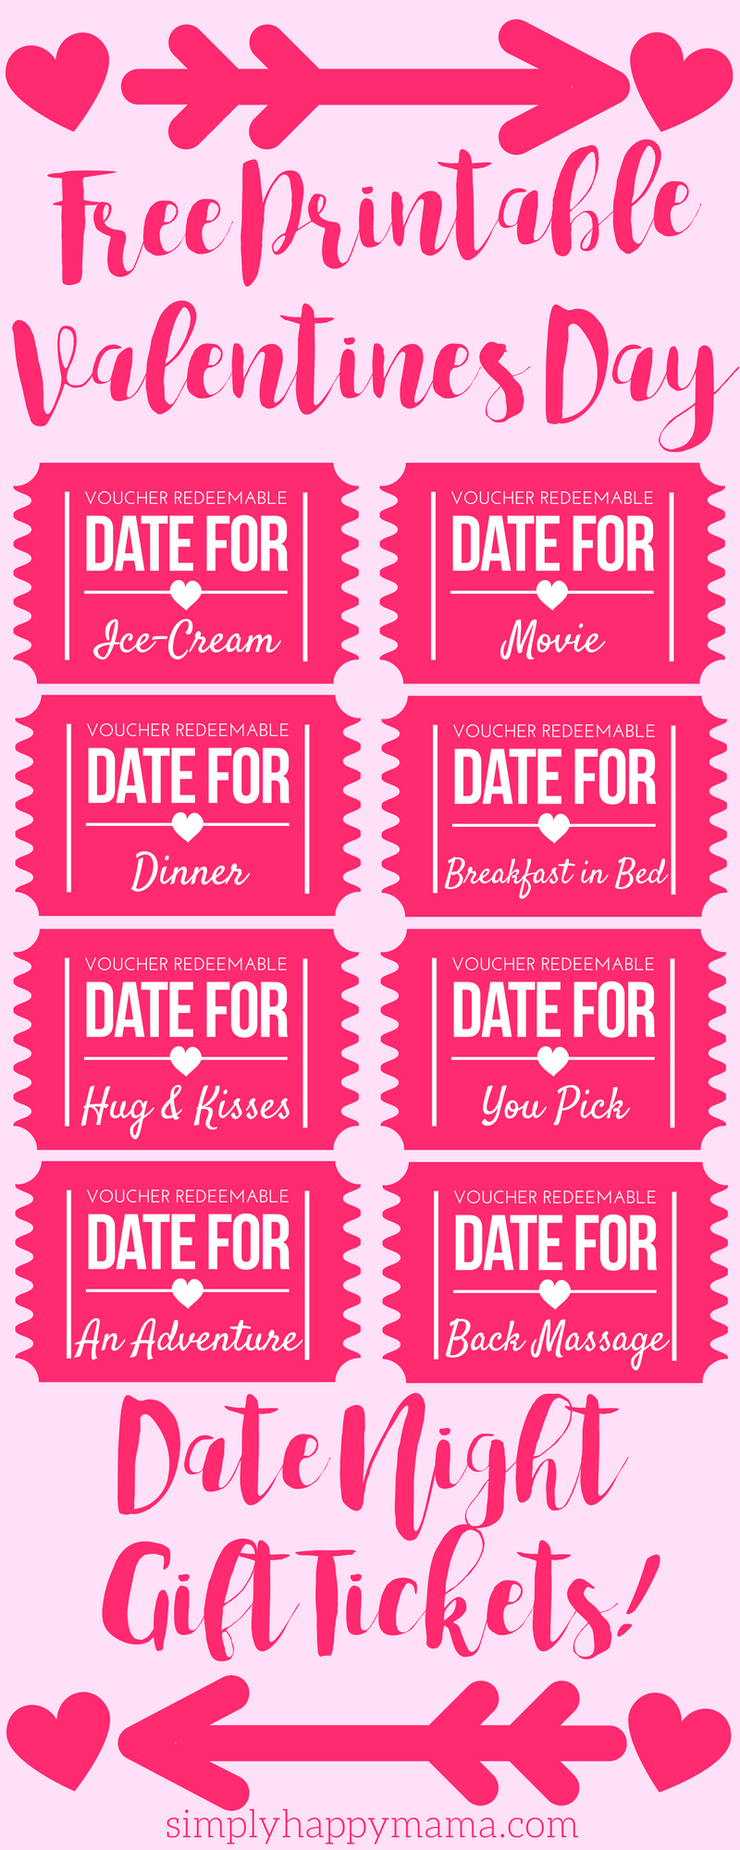 Free Printable Valentines Day Coupons | Simply Happy Mama - Free Printable Valentines Day Coupons For Boyfriend